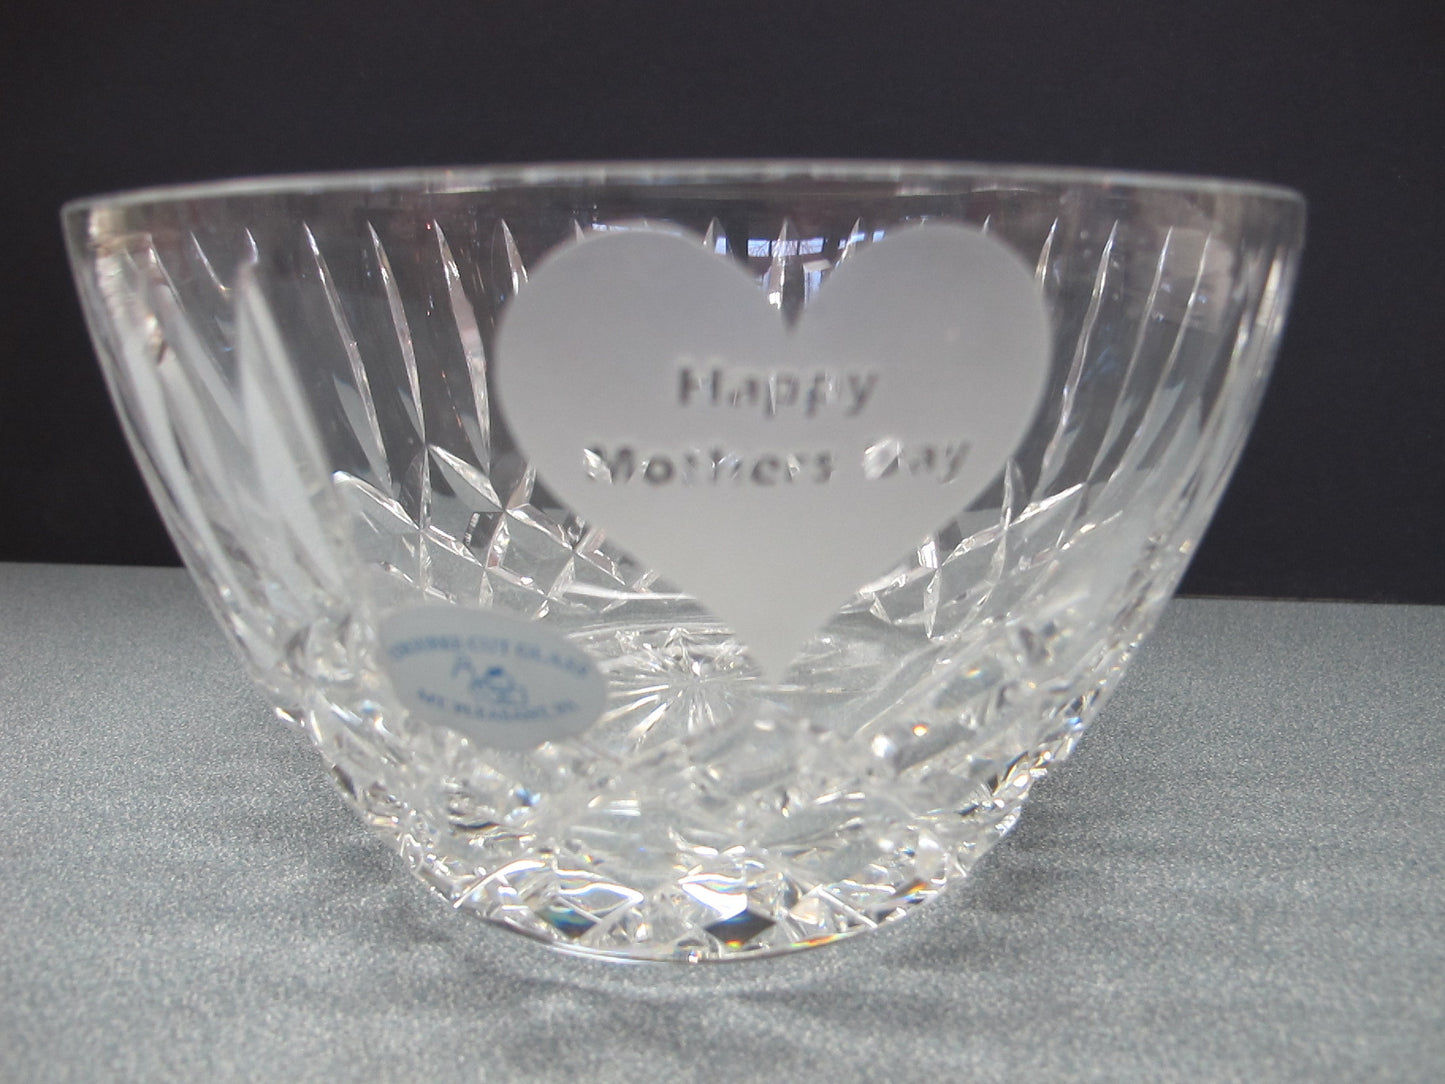 Hand Cut glass Mothers day bowl bowl HAND POLISHED crystal signed - O'Rourke crystal awards & gifts abp cut glass